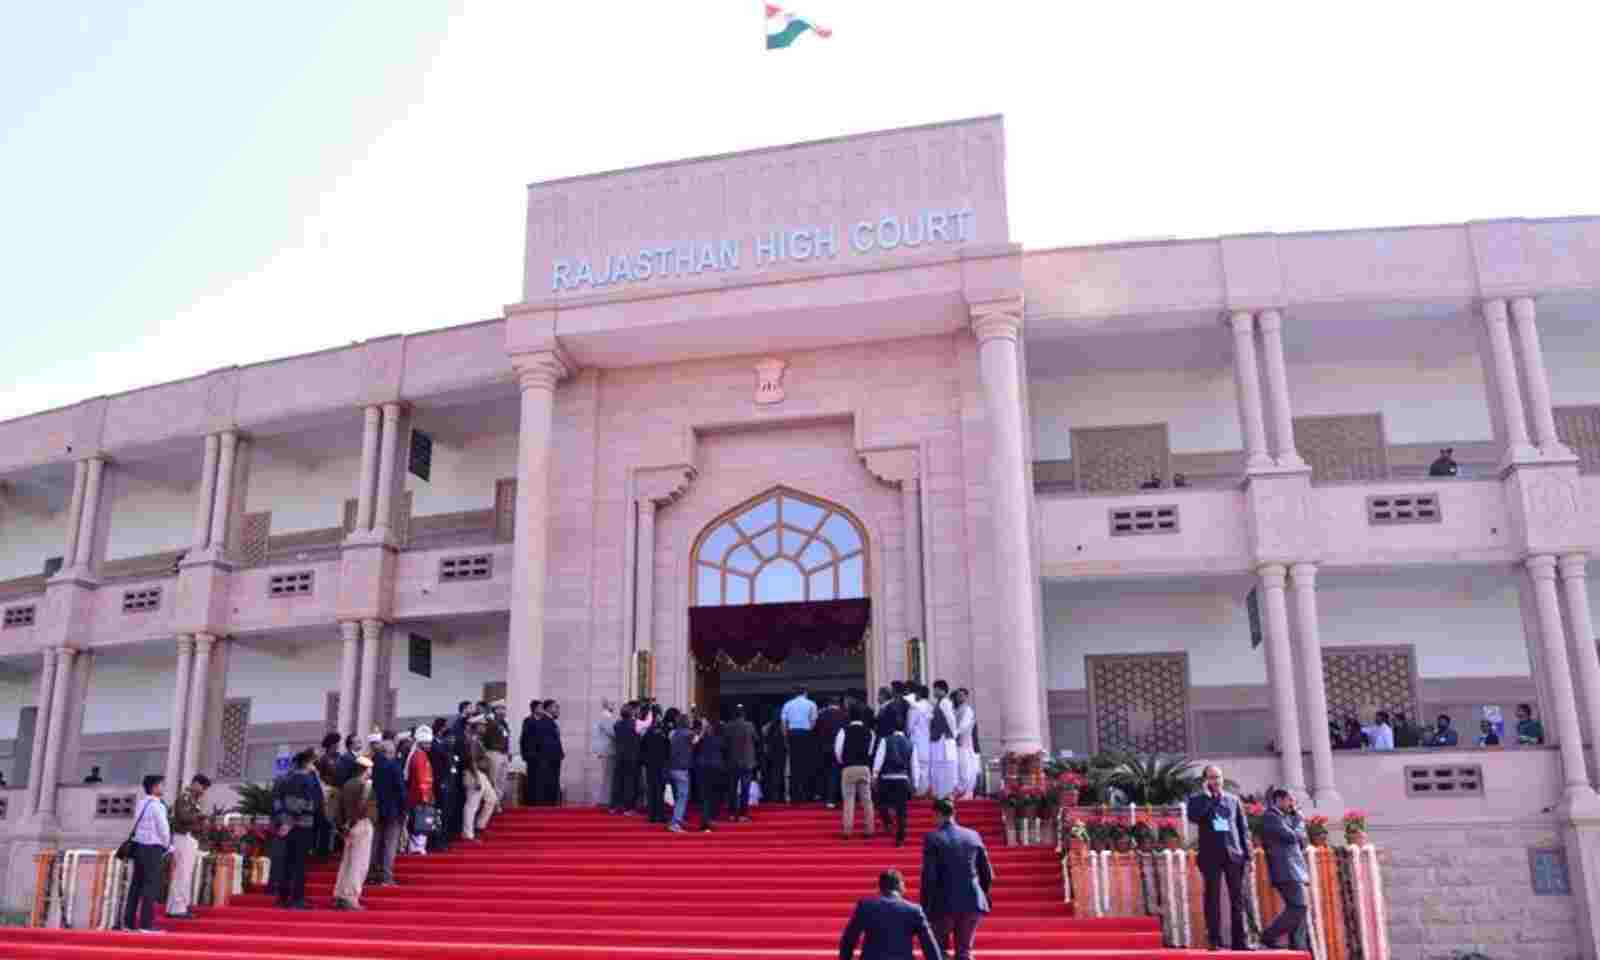 Rajasthan High Court granting parole to murder convict